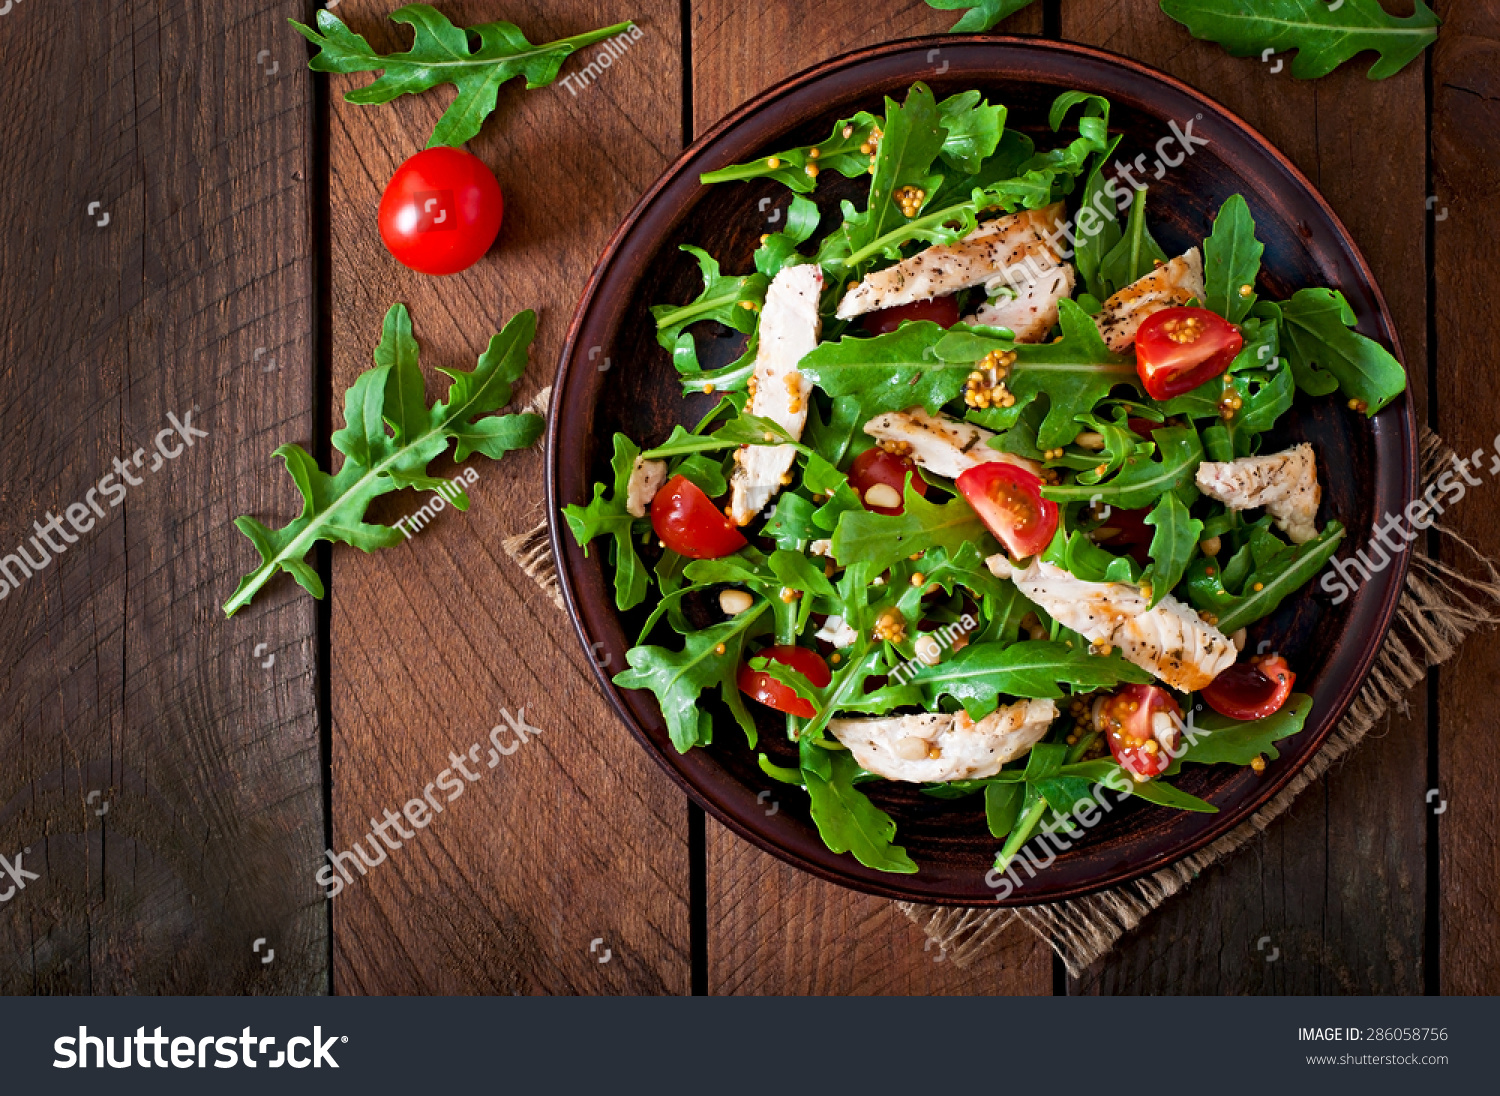 Fresh salad with chicken breast, arugula and tomato. Top view #286058756